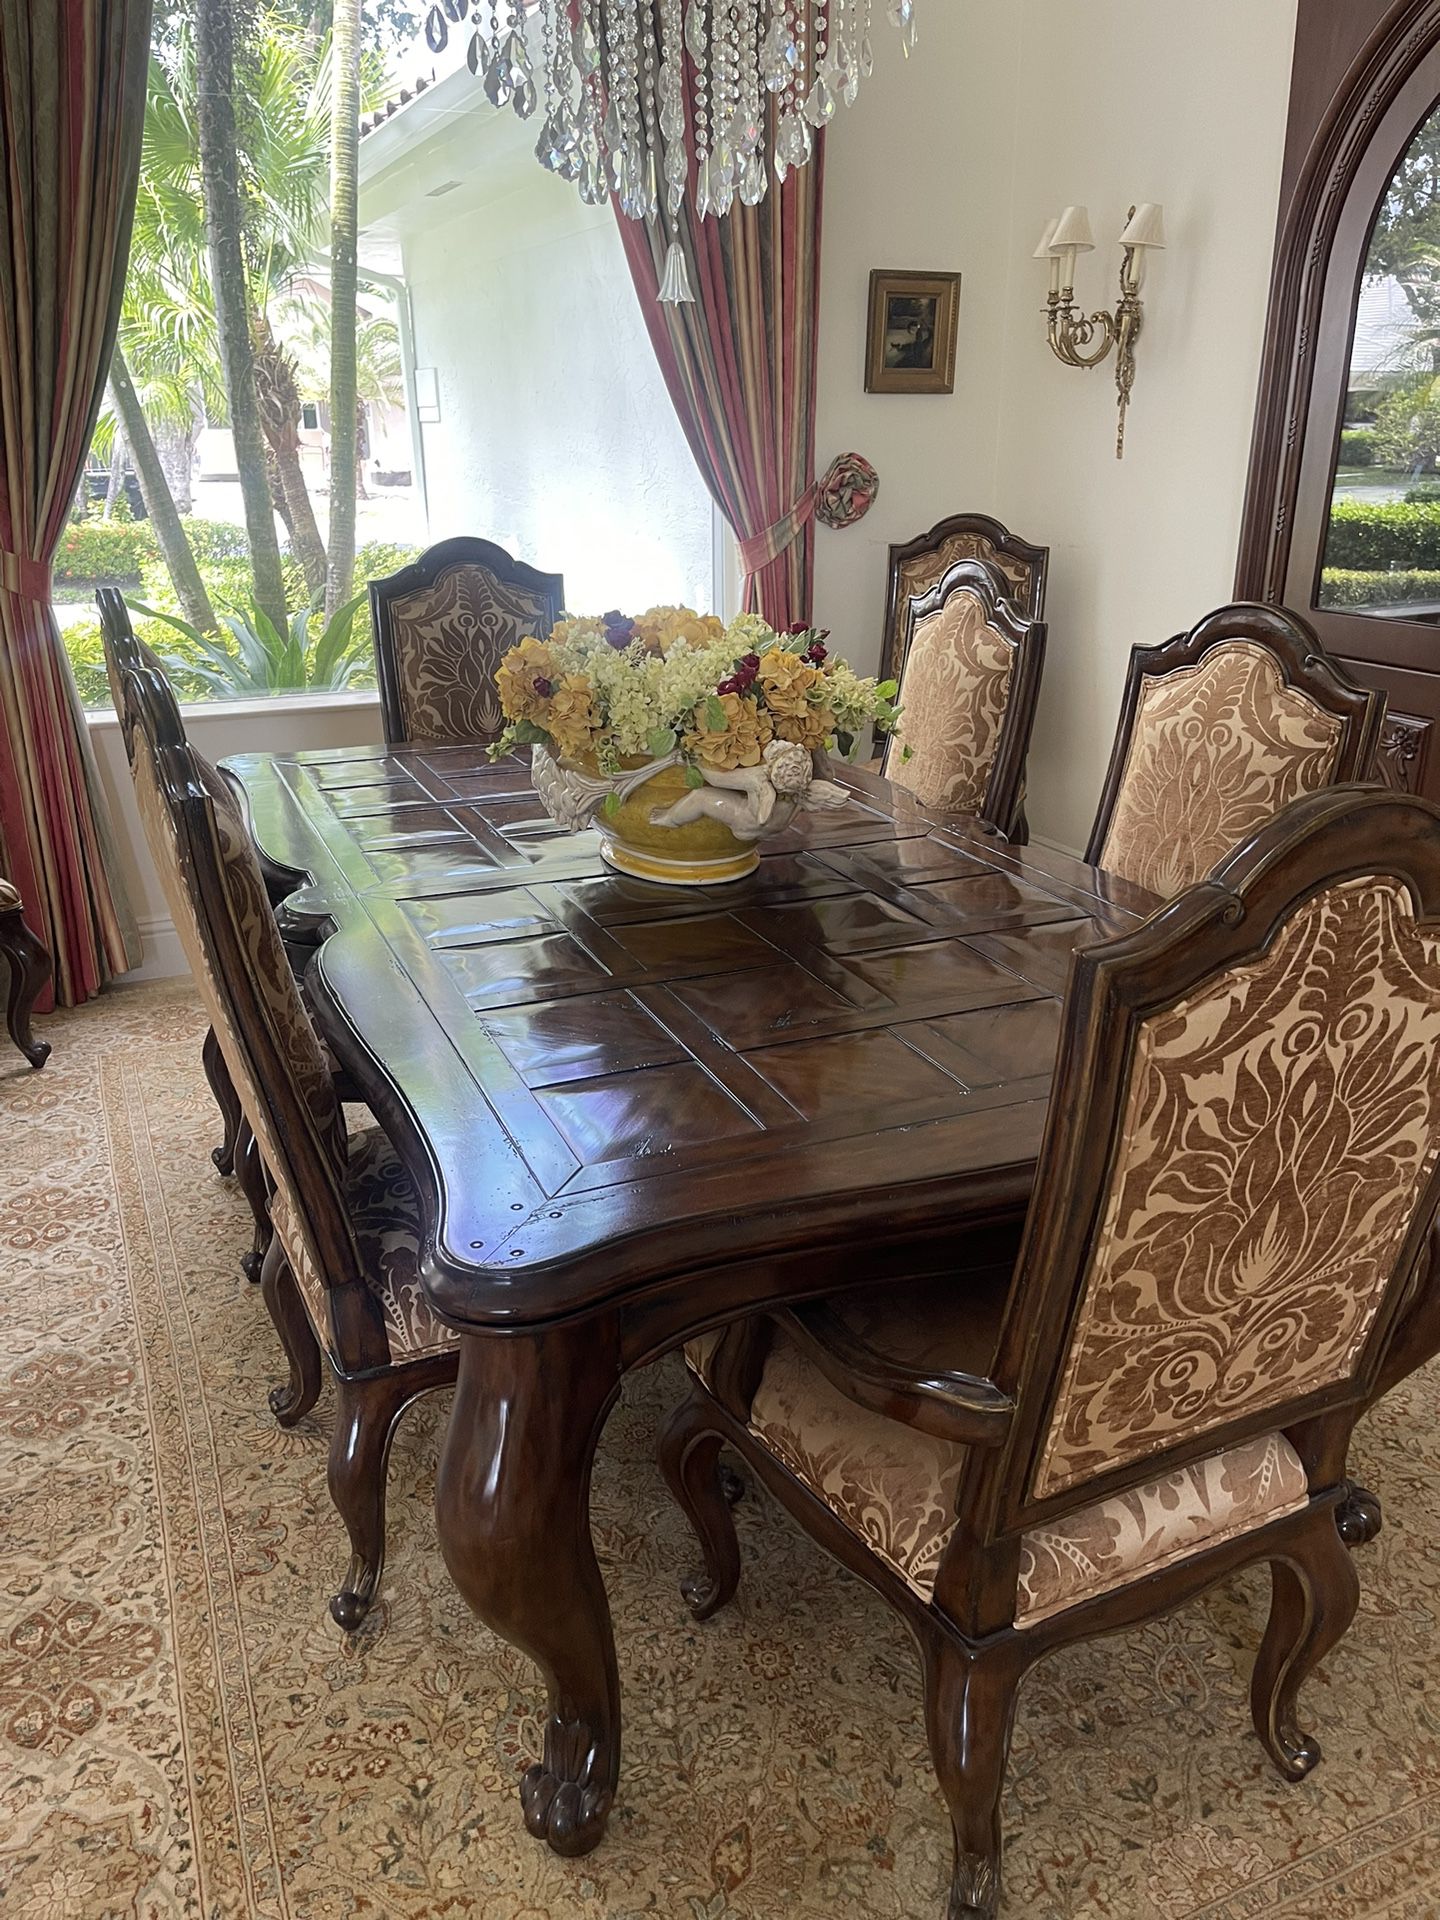 Marge Carson Vouvray Dining Table w/ 8 Chairs and 1 Leaf - Amazing condition - Extra Seat Linings - Originally $22,000.   Asking $5999